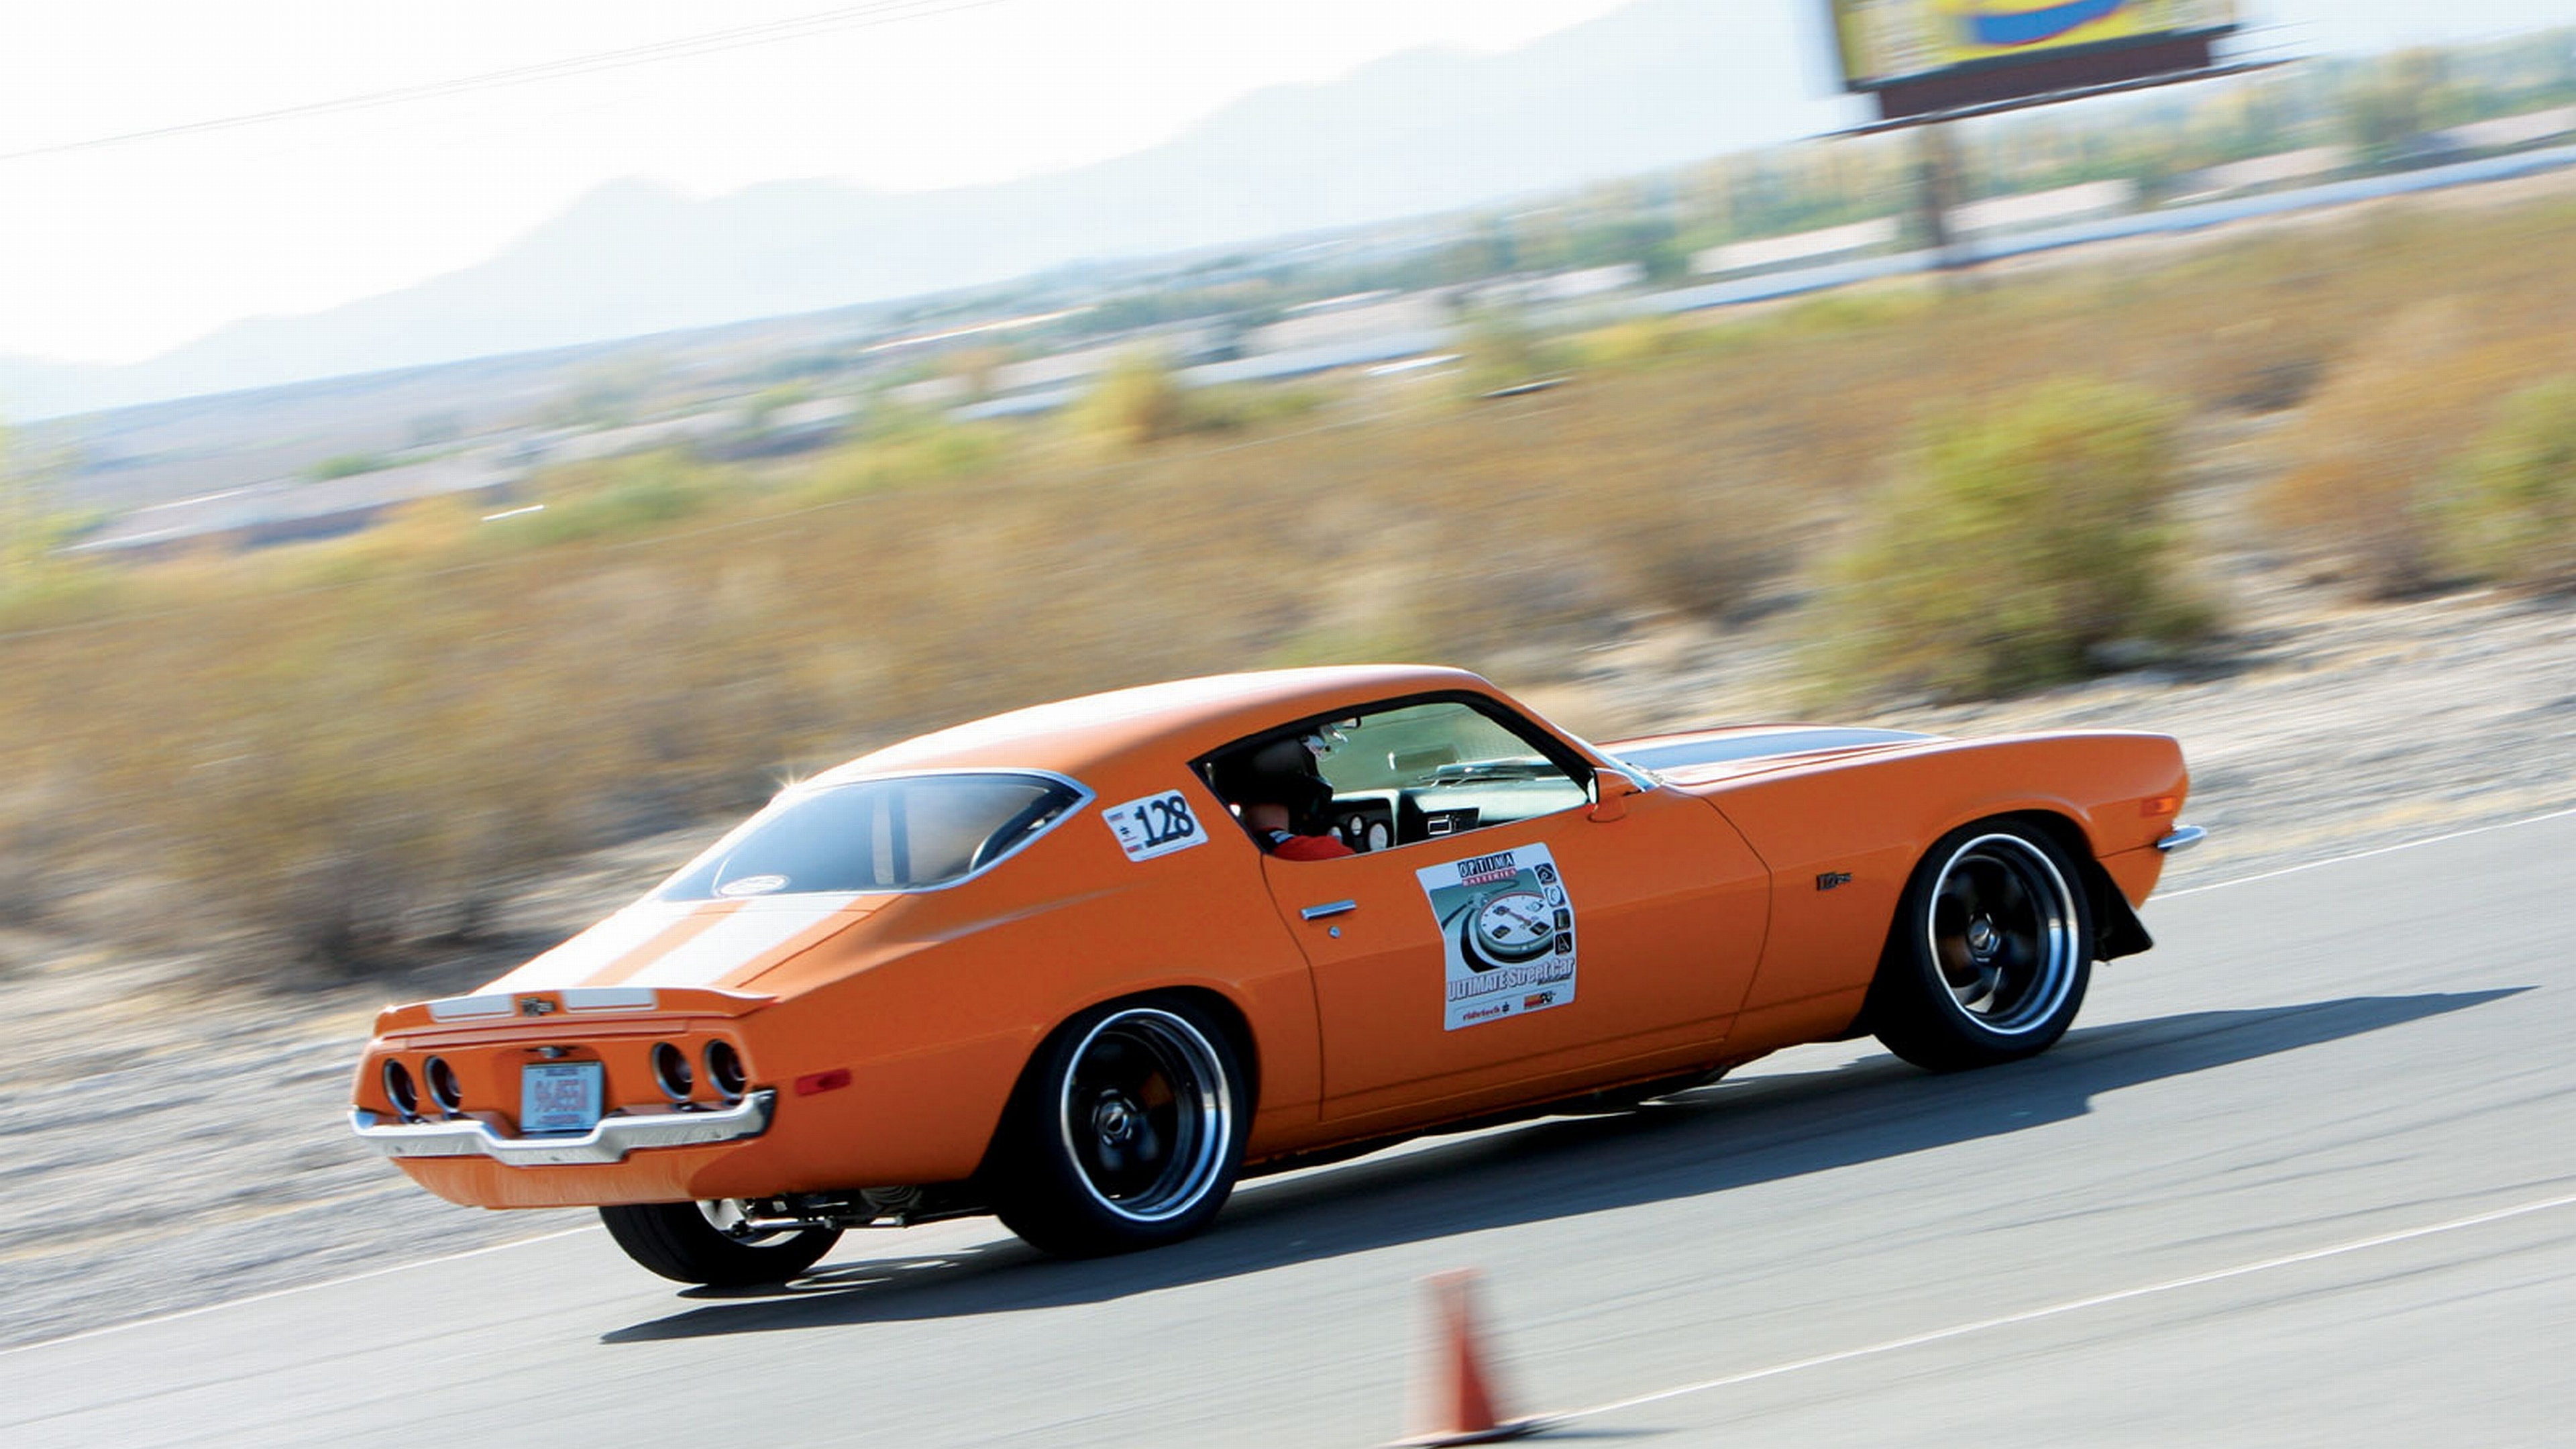 Autocross: 1970 Chevrolet Camaro, American sports car, Racing track, Supercharged V8 engine. 3840x2160 4K Wallpaper.